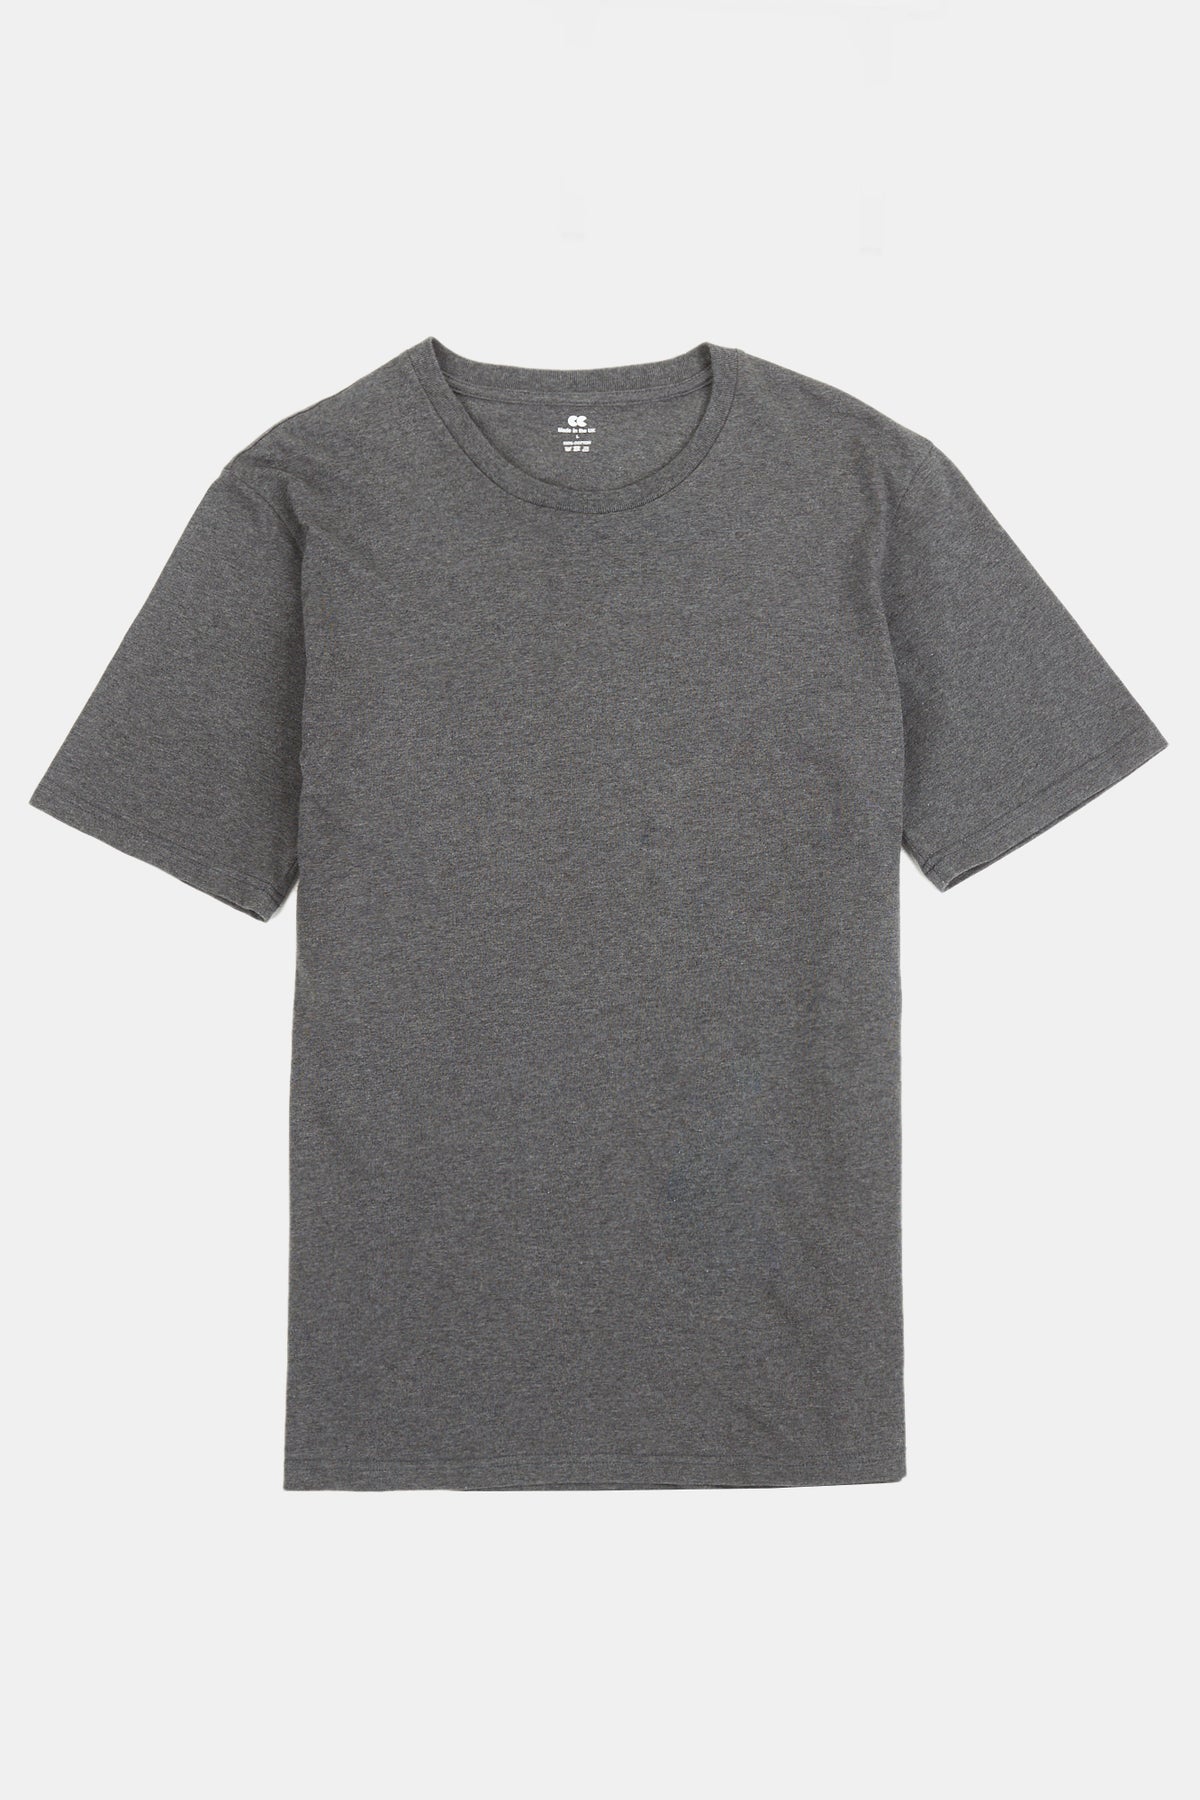 
            short sleeve t-shirt in charcoal flat lay